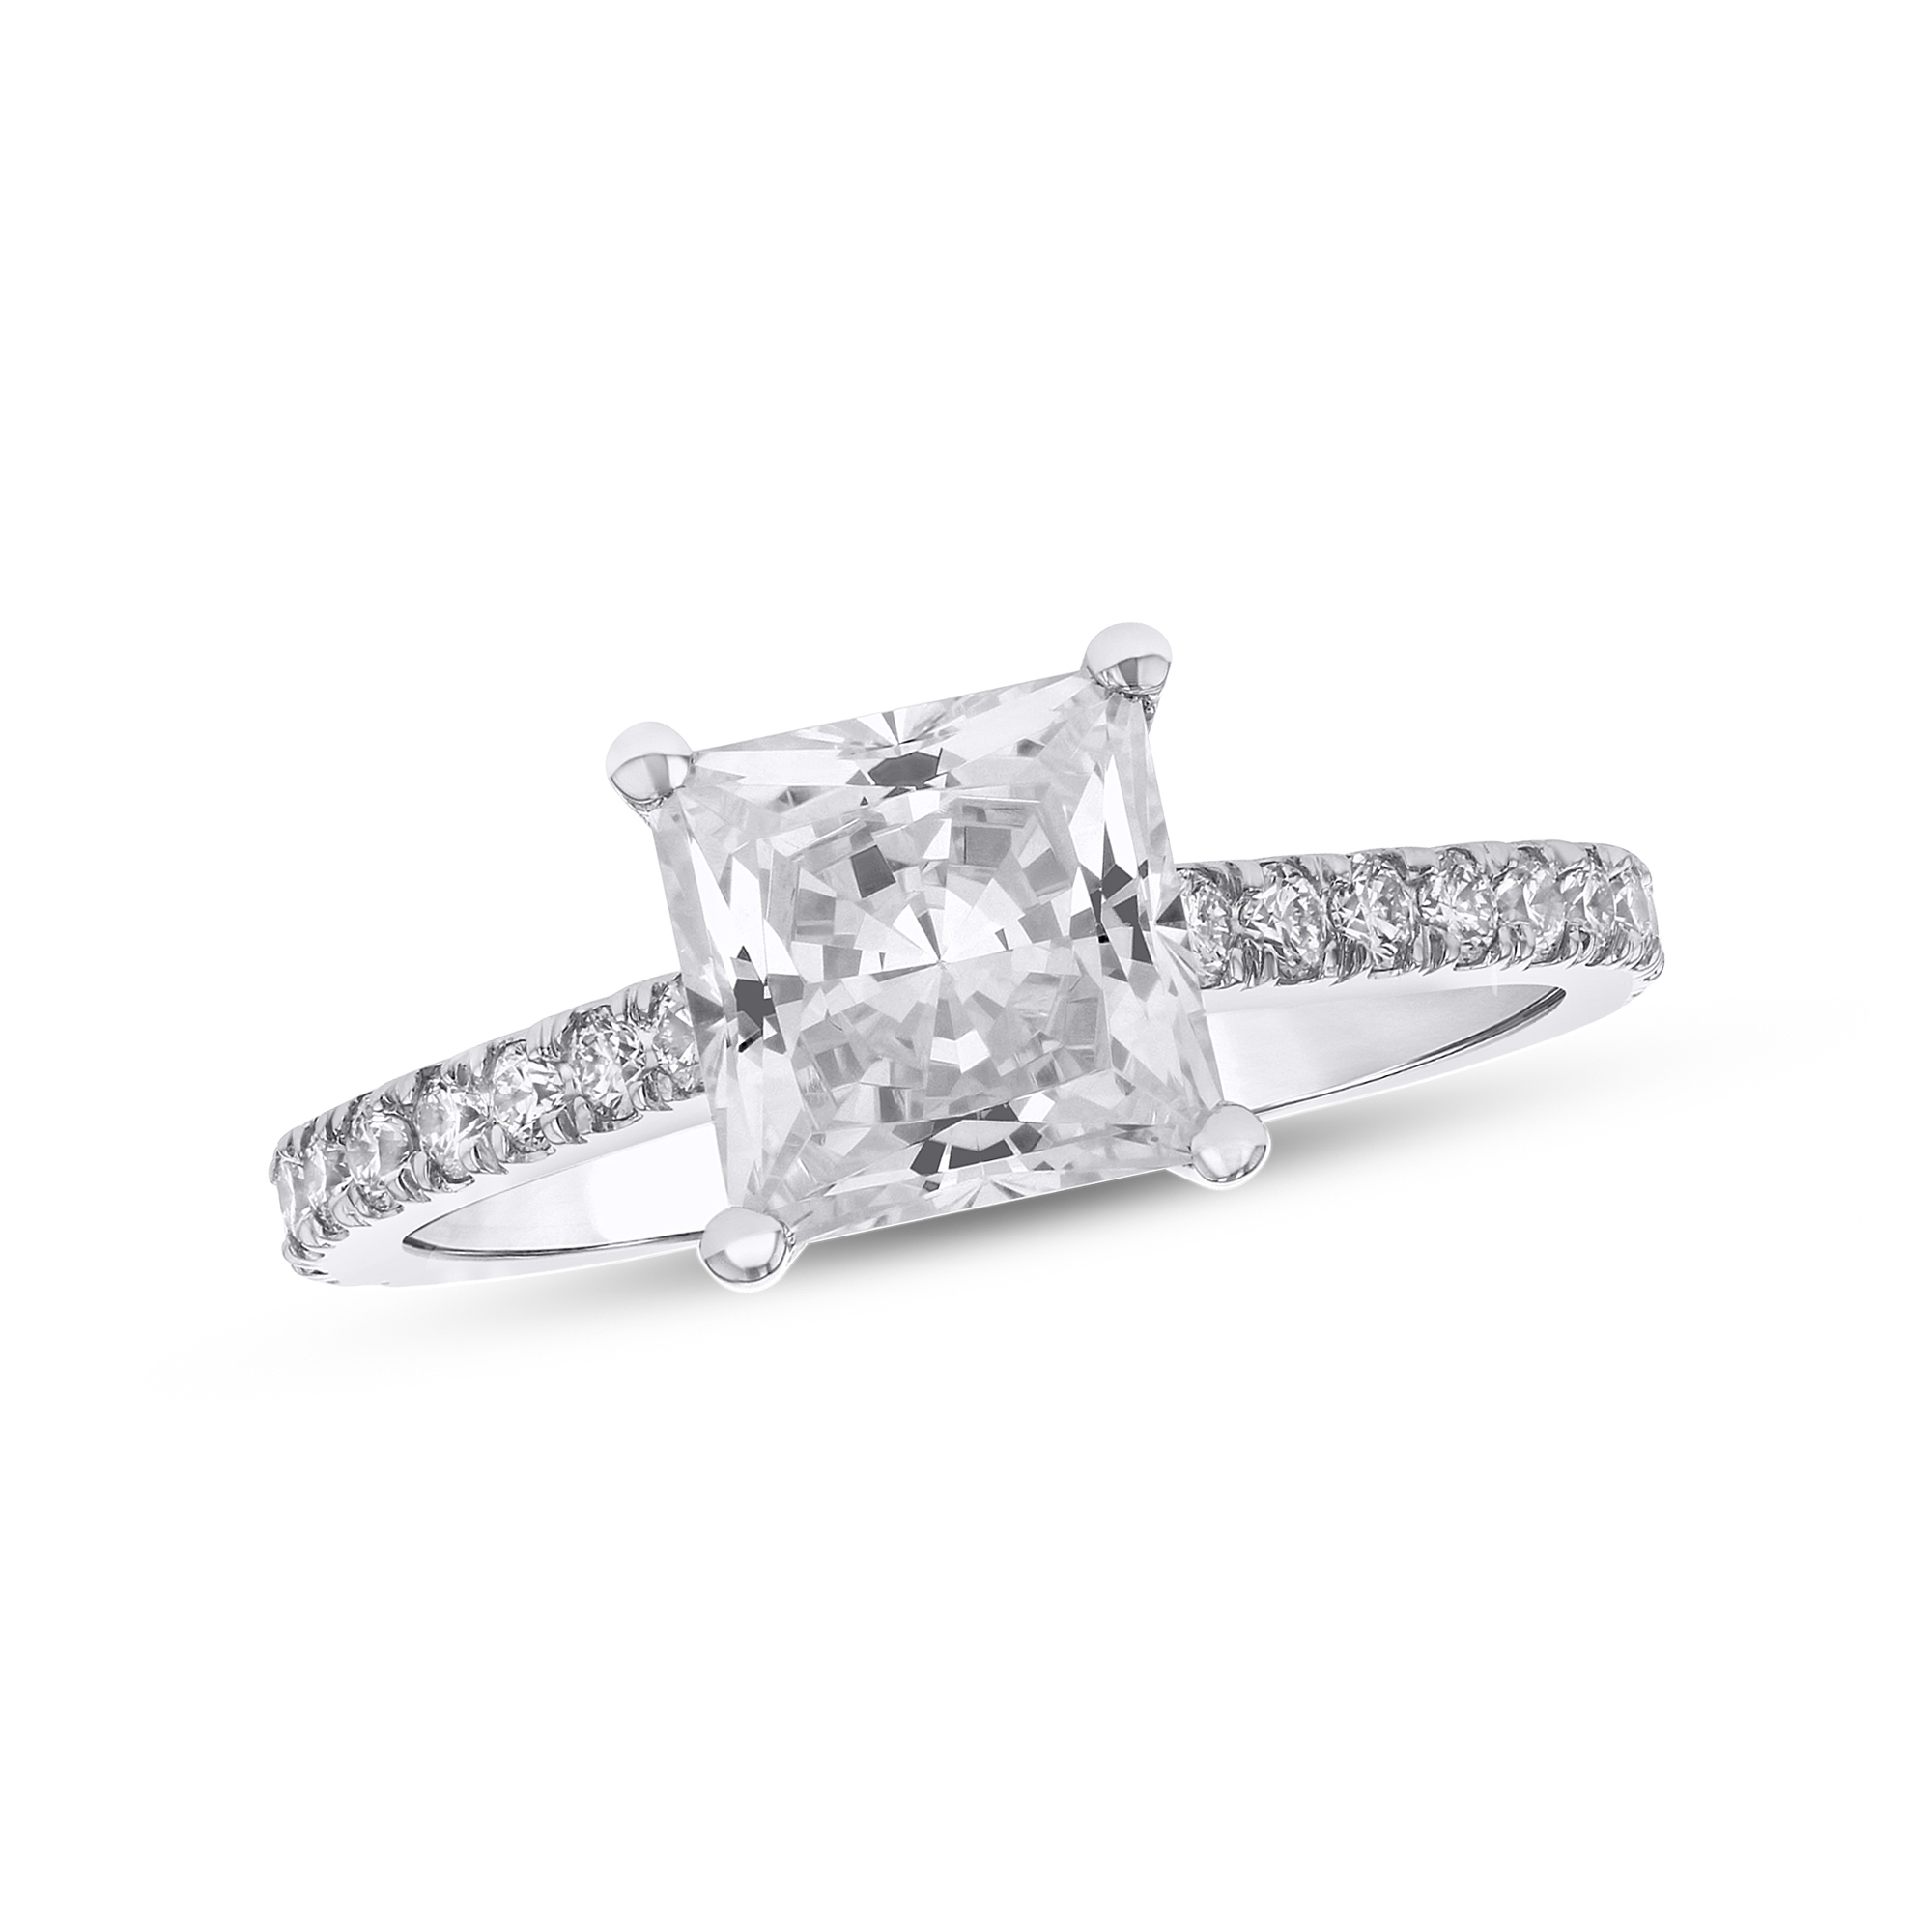 View 0.36ctw Diamond Semi Mount Engagement Ring in 14k White Gold